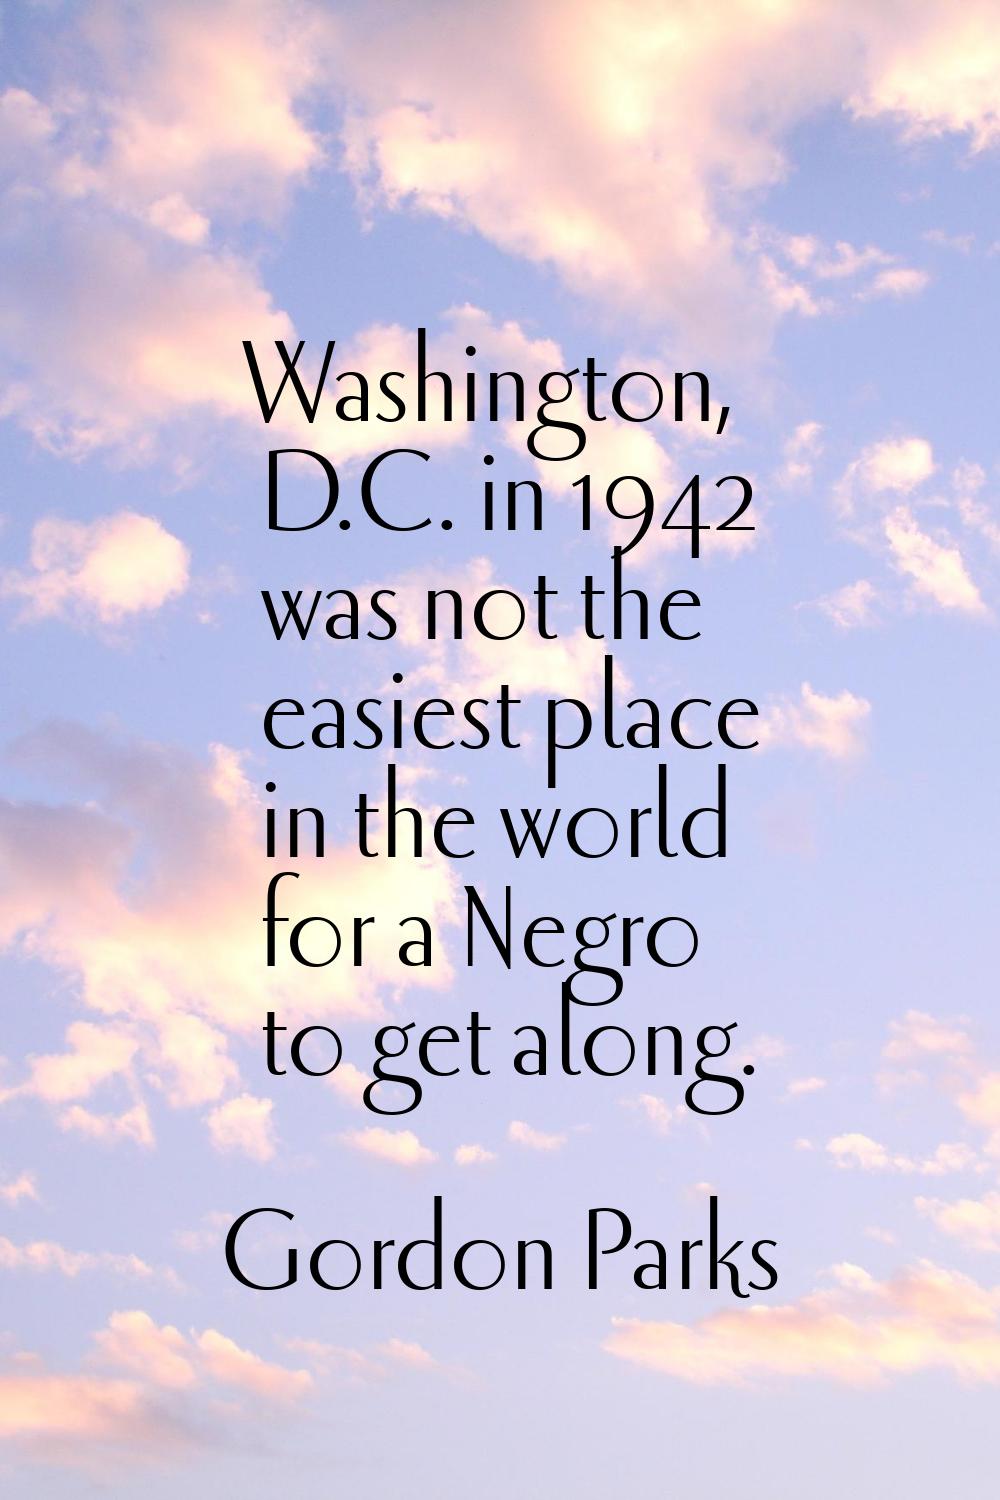 Washington, D.C. in 1942 was not the easiest place in the world for a Negro to get along.